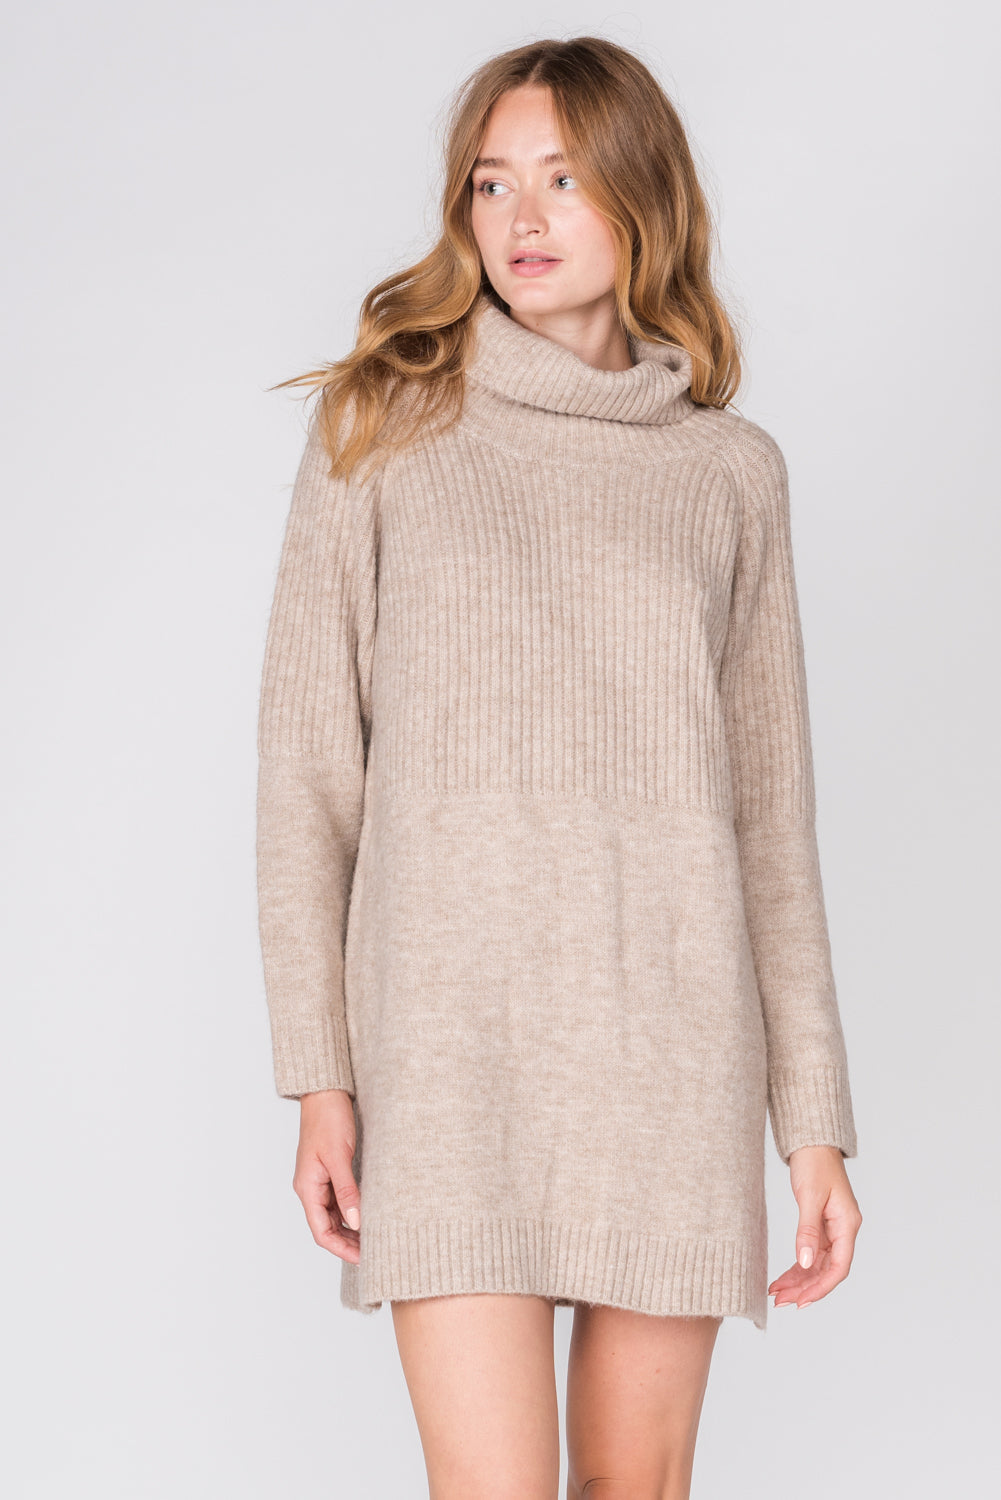 This $35 Oversized Sweater Dress Has 3,700+ 5-Star  Reviews